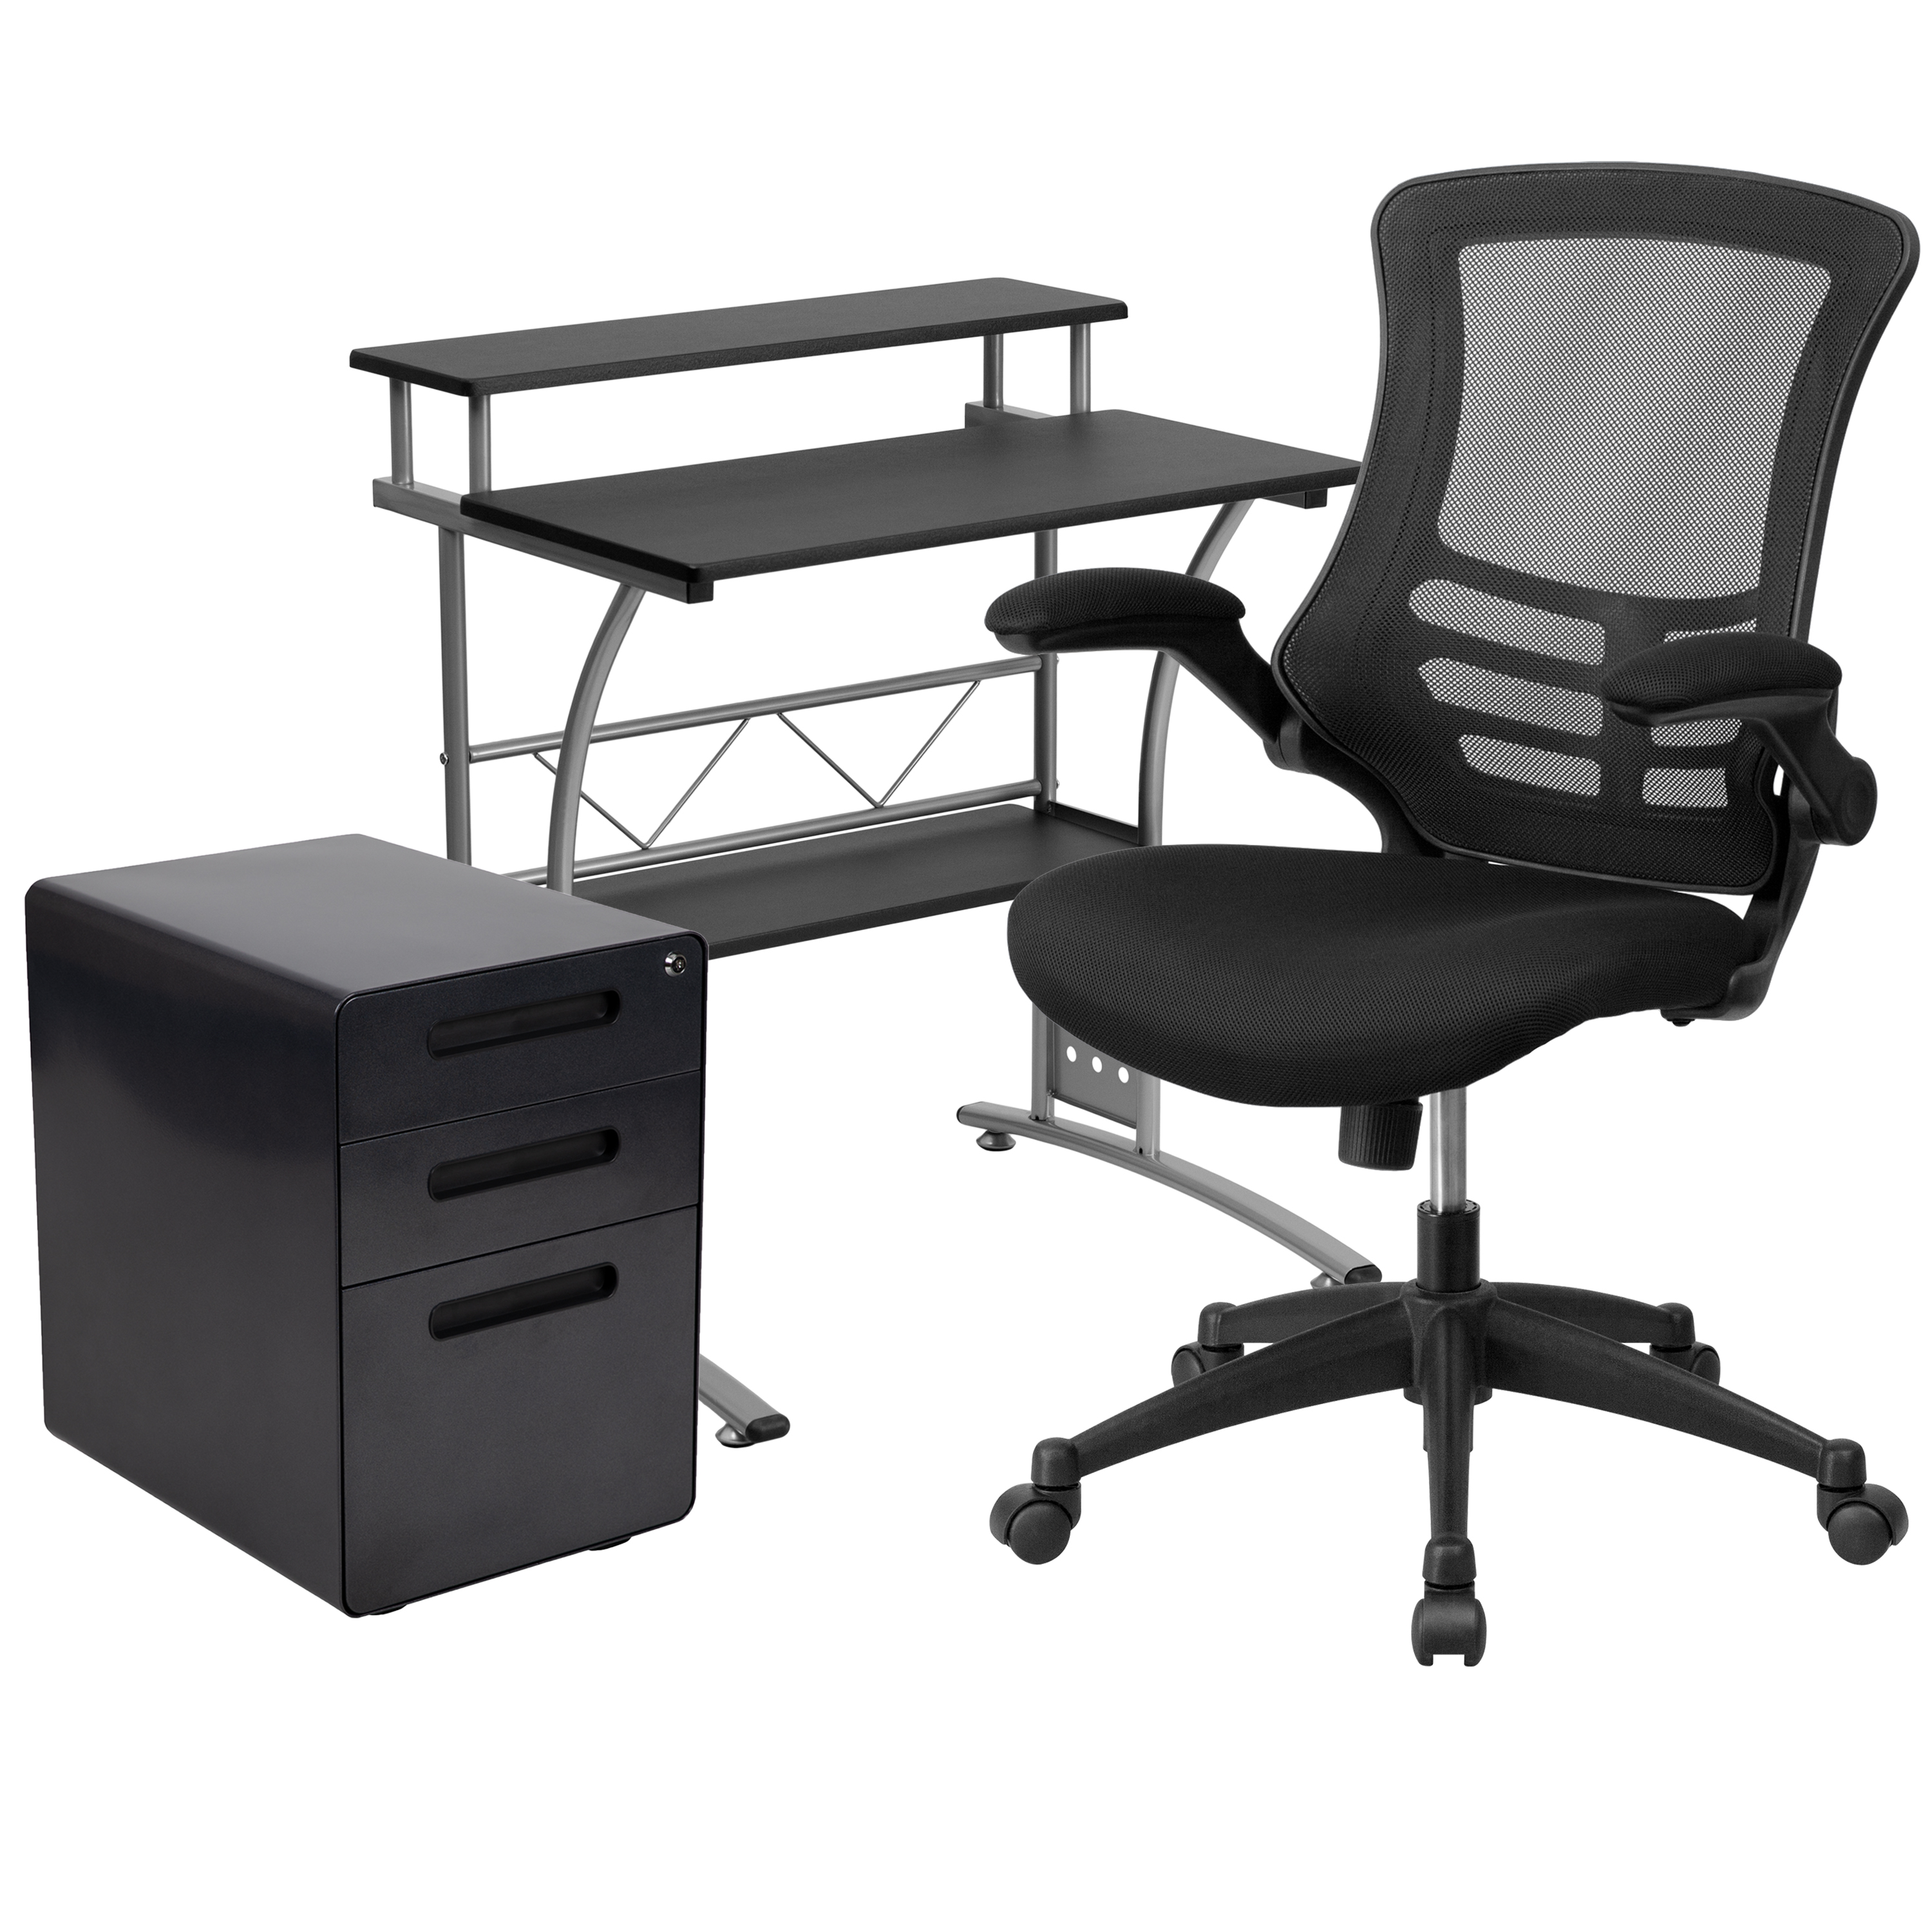 Flash Furniture BLN-CLIFAPPX5-BK-GG Black Computer Desk, Ergonomic Mesh Office Chair and Locking Mobile Filing Cabinet with Inset Handles